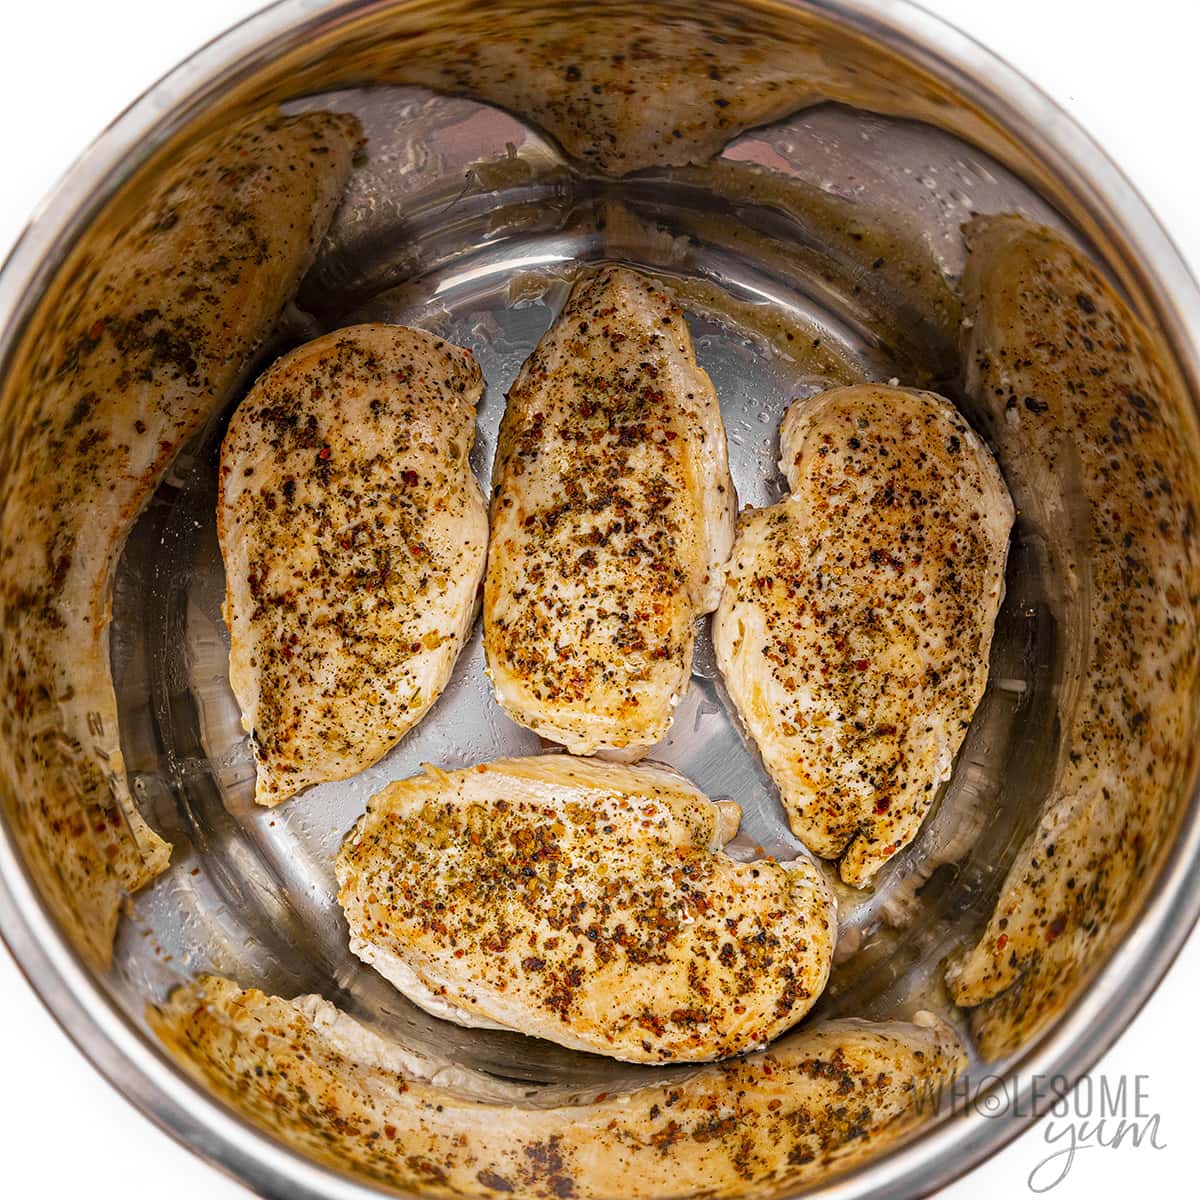 Seared chicken in the Instant Pot.